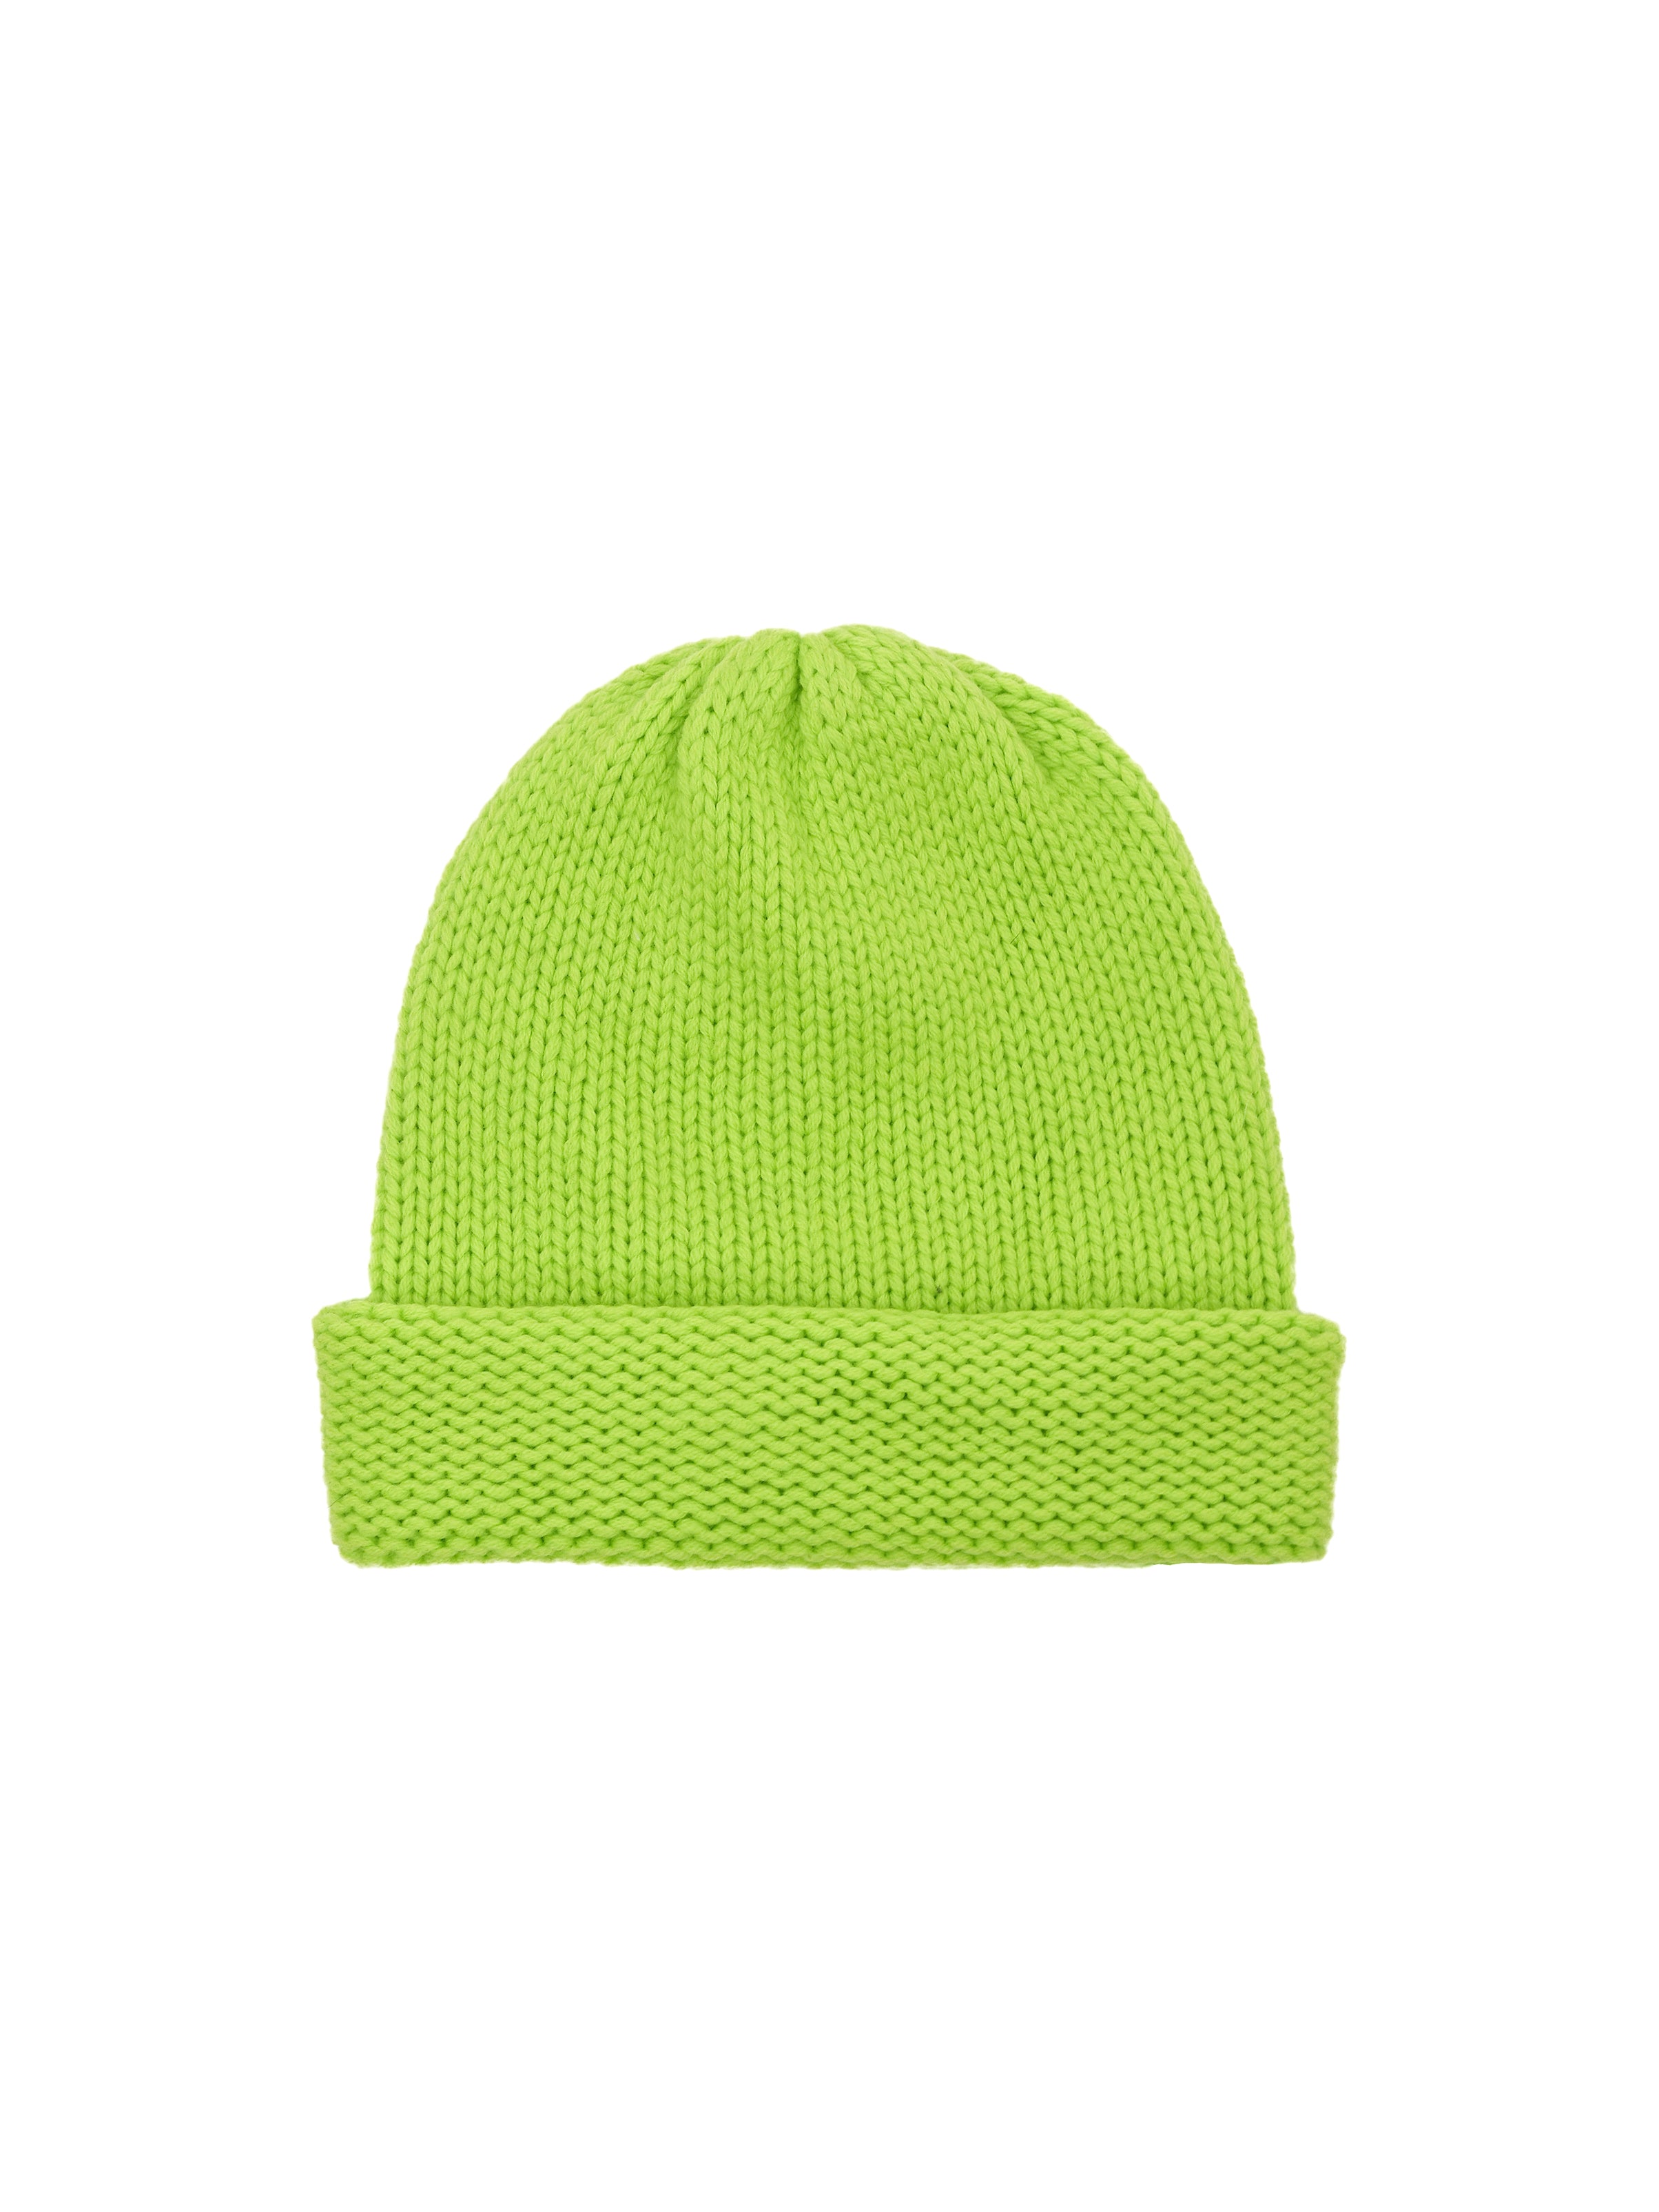 KNIT WOOL BEANIE IN LIME GREEN